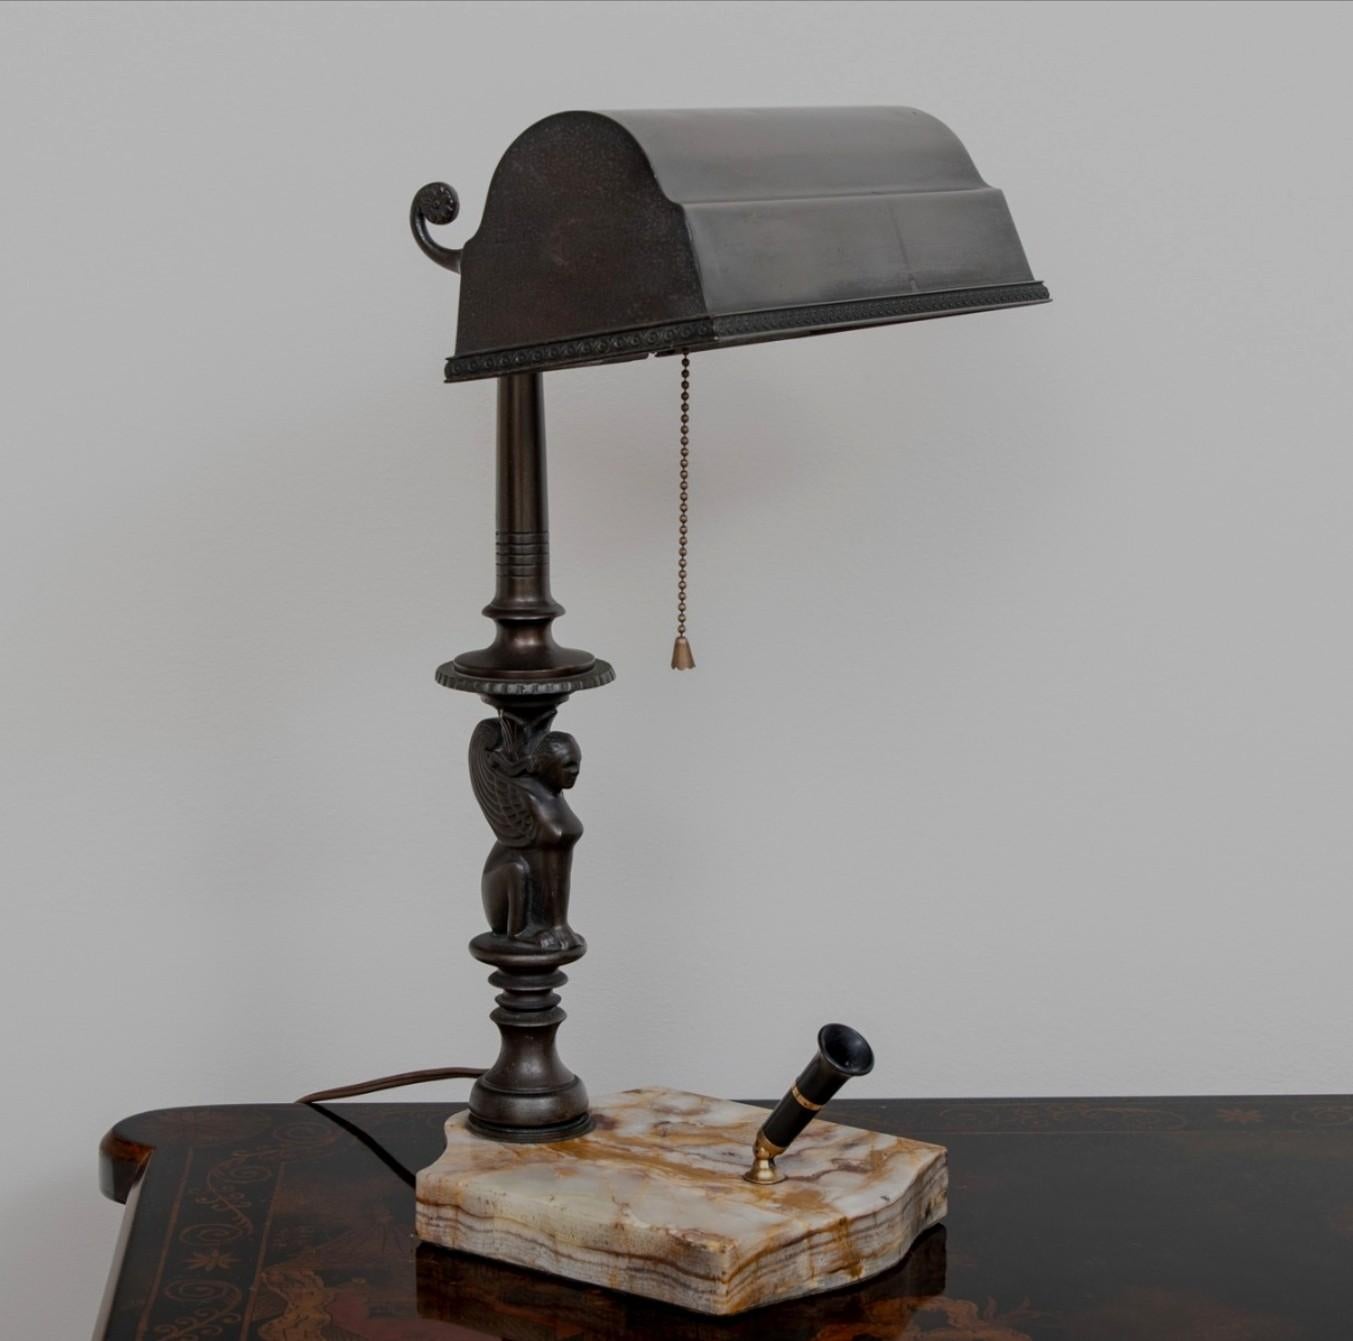 A fine antique American Art Deco Amronlite Sheaffer Fountain Pen banker's style desk lamp deluxe, circa late 1920s, featuring beautifully patinated original brass shade, rising on figural Egyptian winged sphinx form column on a shaped marble base